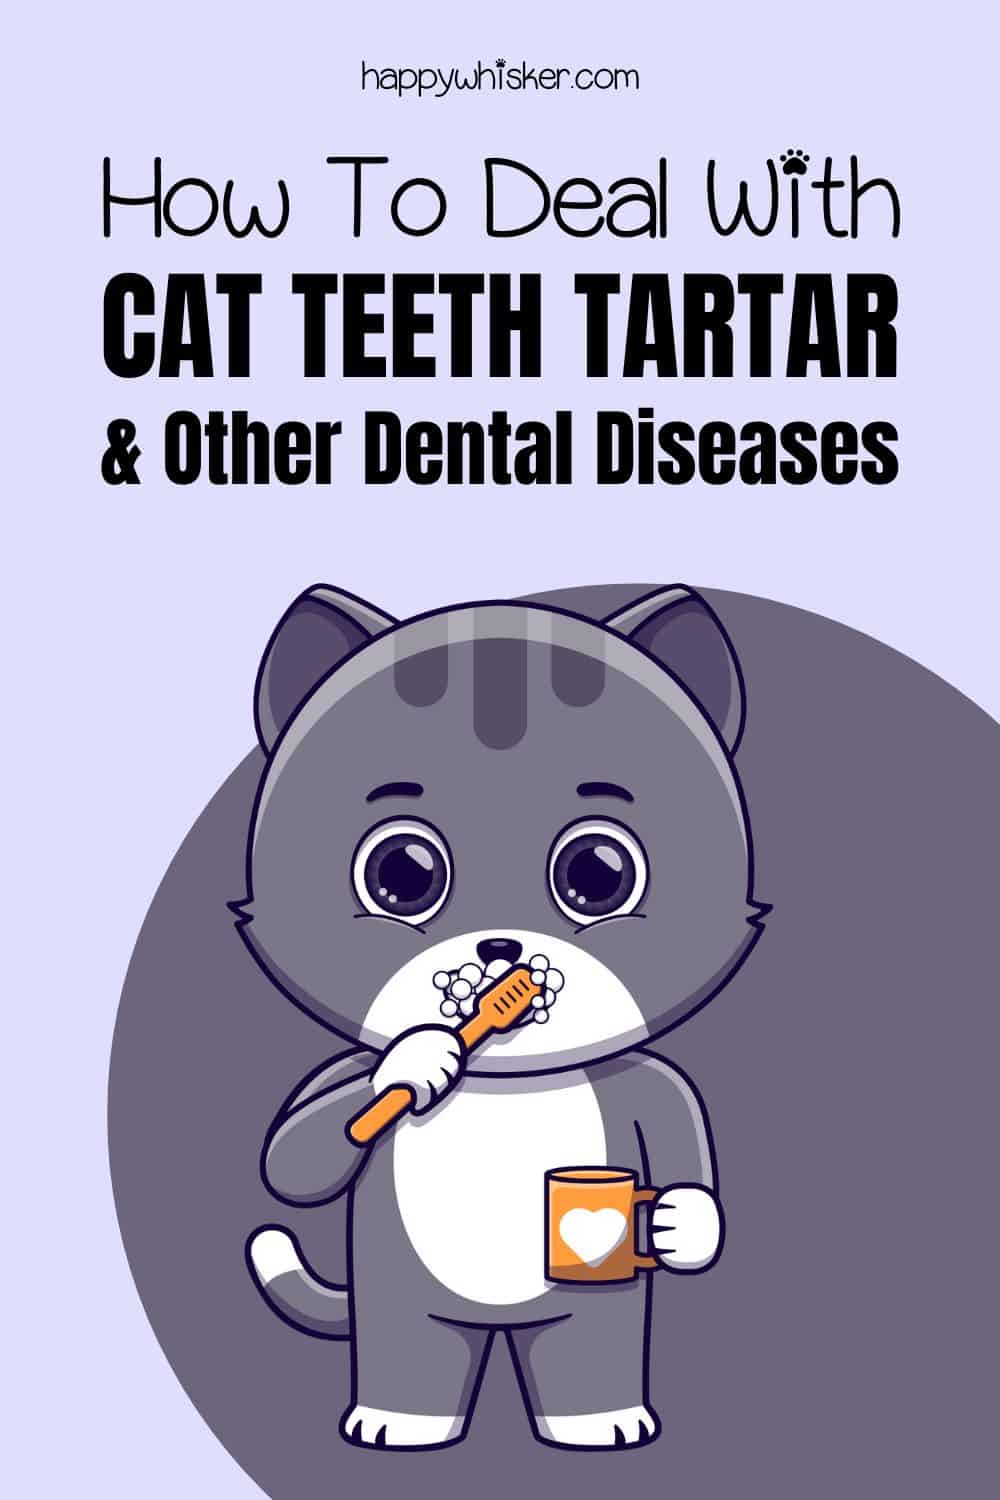 How-To-Deal-With-Cat-Teeth-Tartar-And-Other-Dental-Diseases-Pinterest